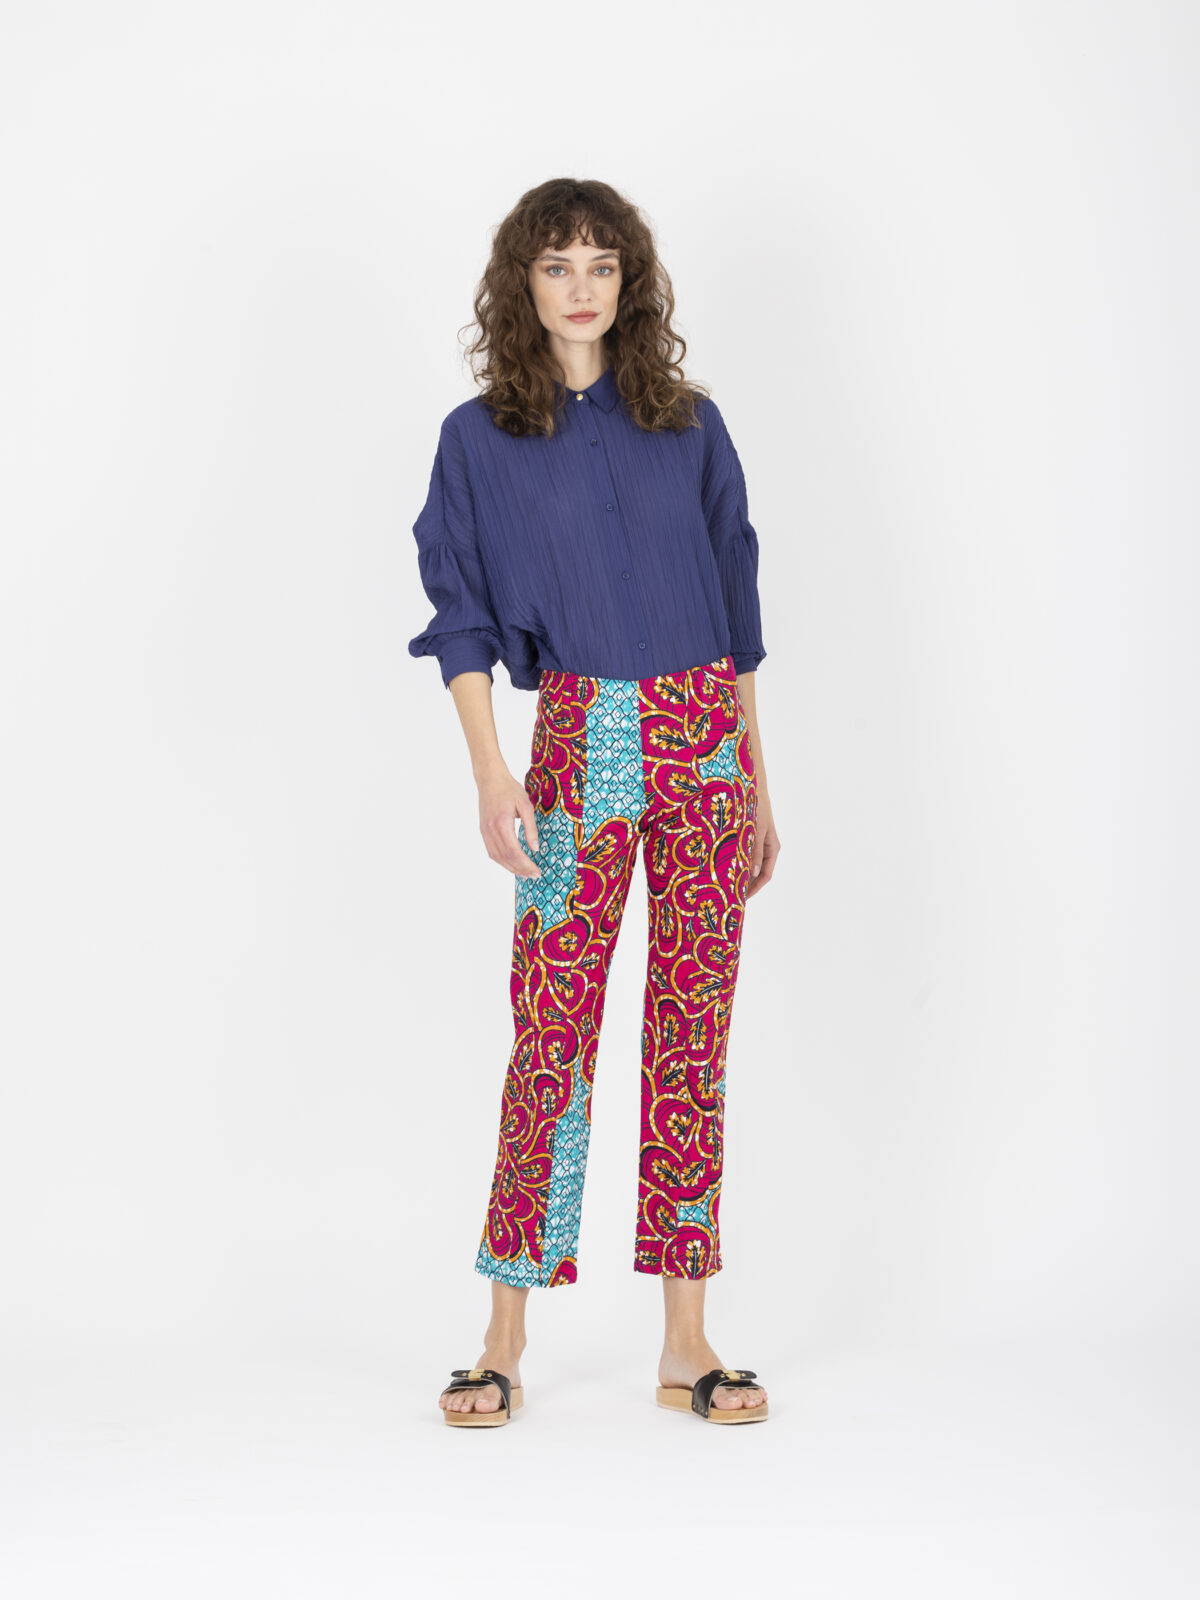 milly-pink-peackok-african-wax-printed-high-waisted-pants-kimale-greek-designers-limited-collections-matchboxathens